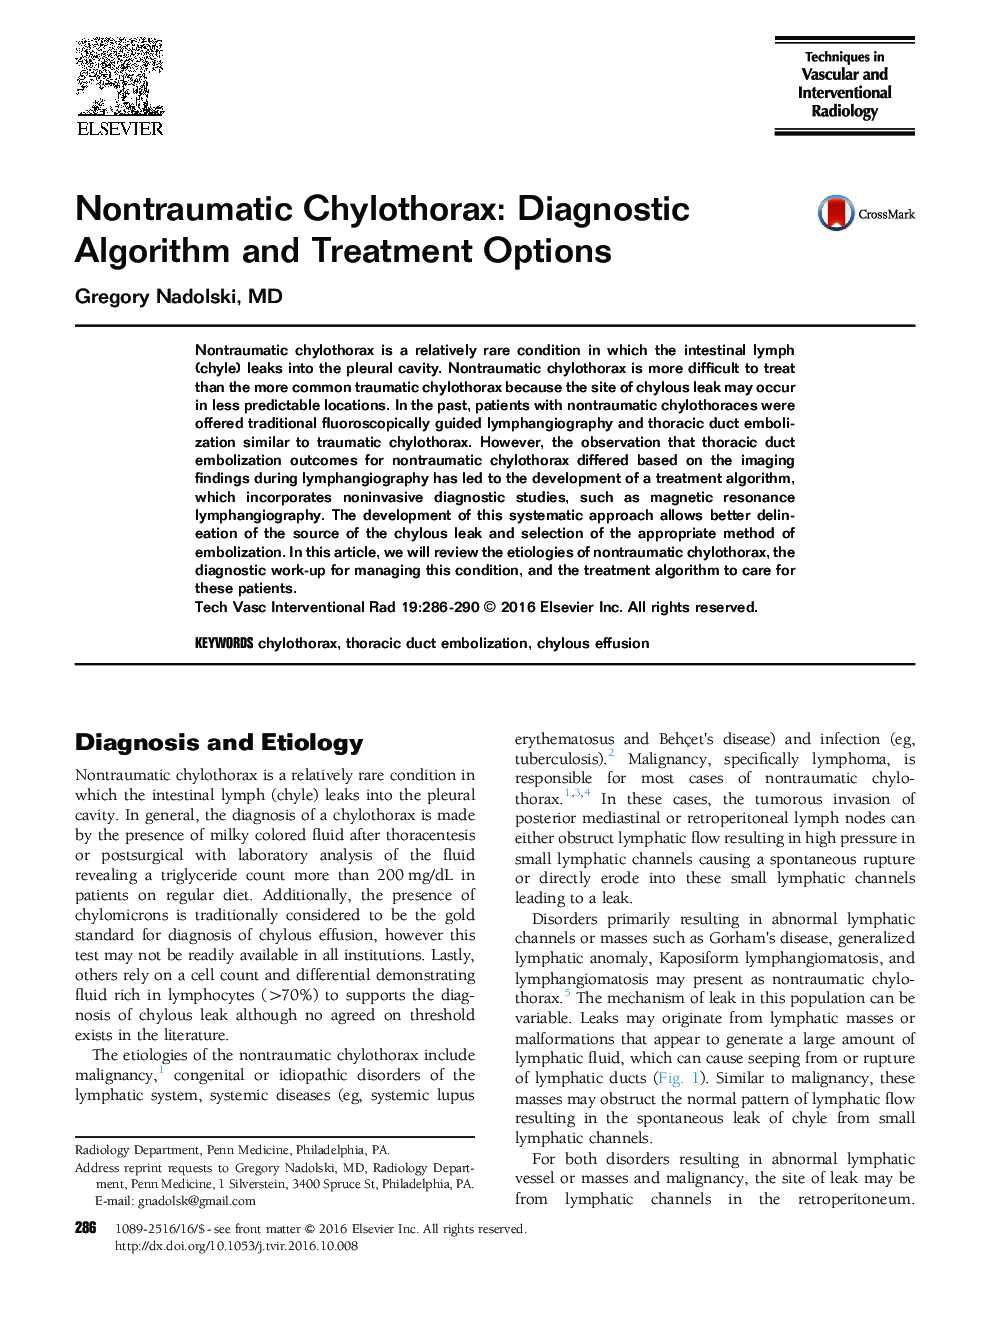 Nontraumatic Chylothorax: Diagnostic Algorithm and Treatment Options